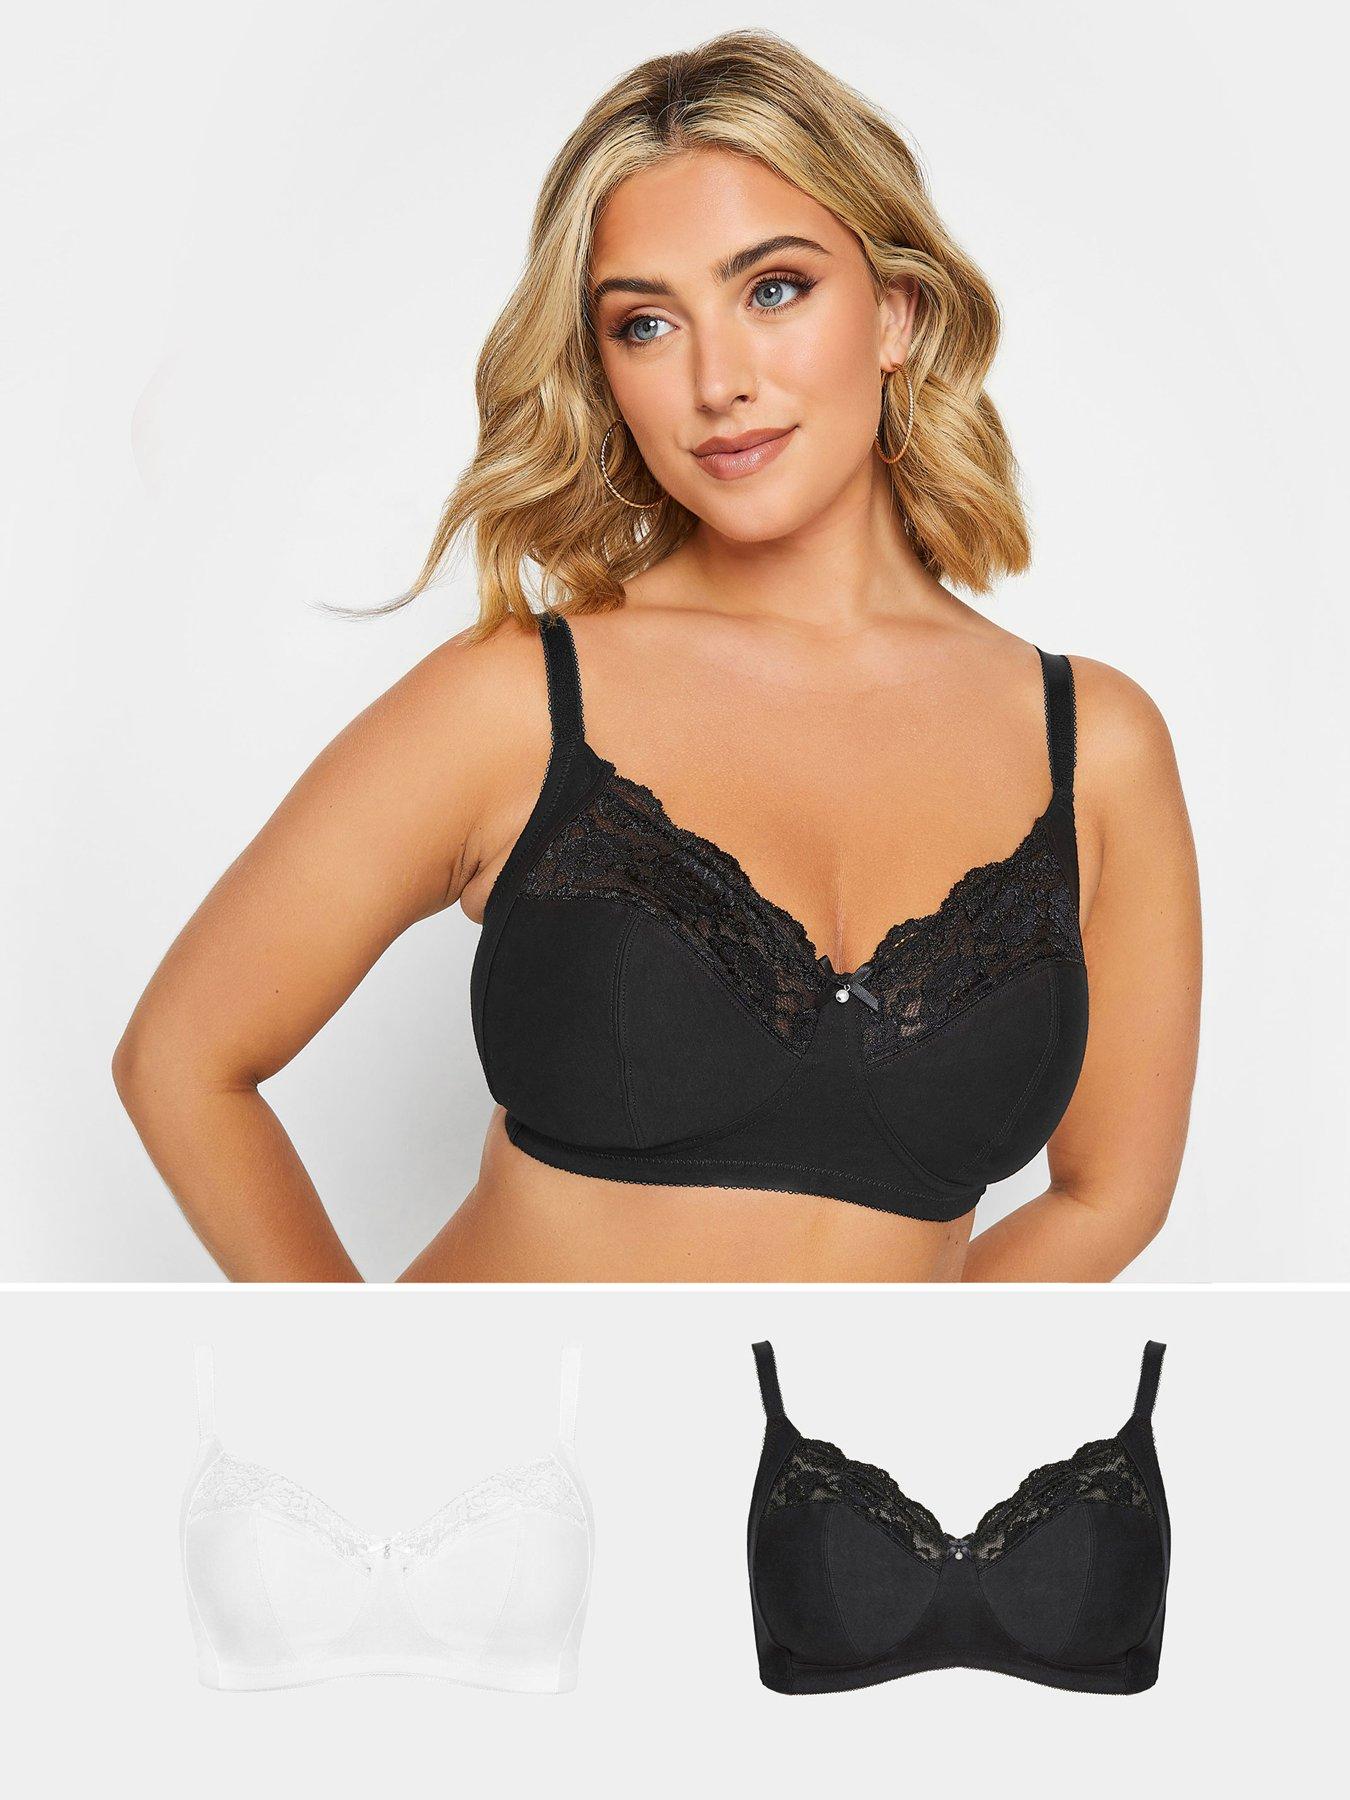 2PK Katie Black/White Lace Full Cup Bras